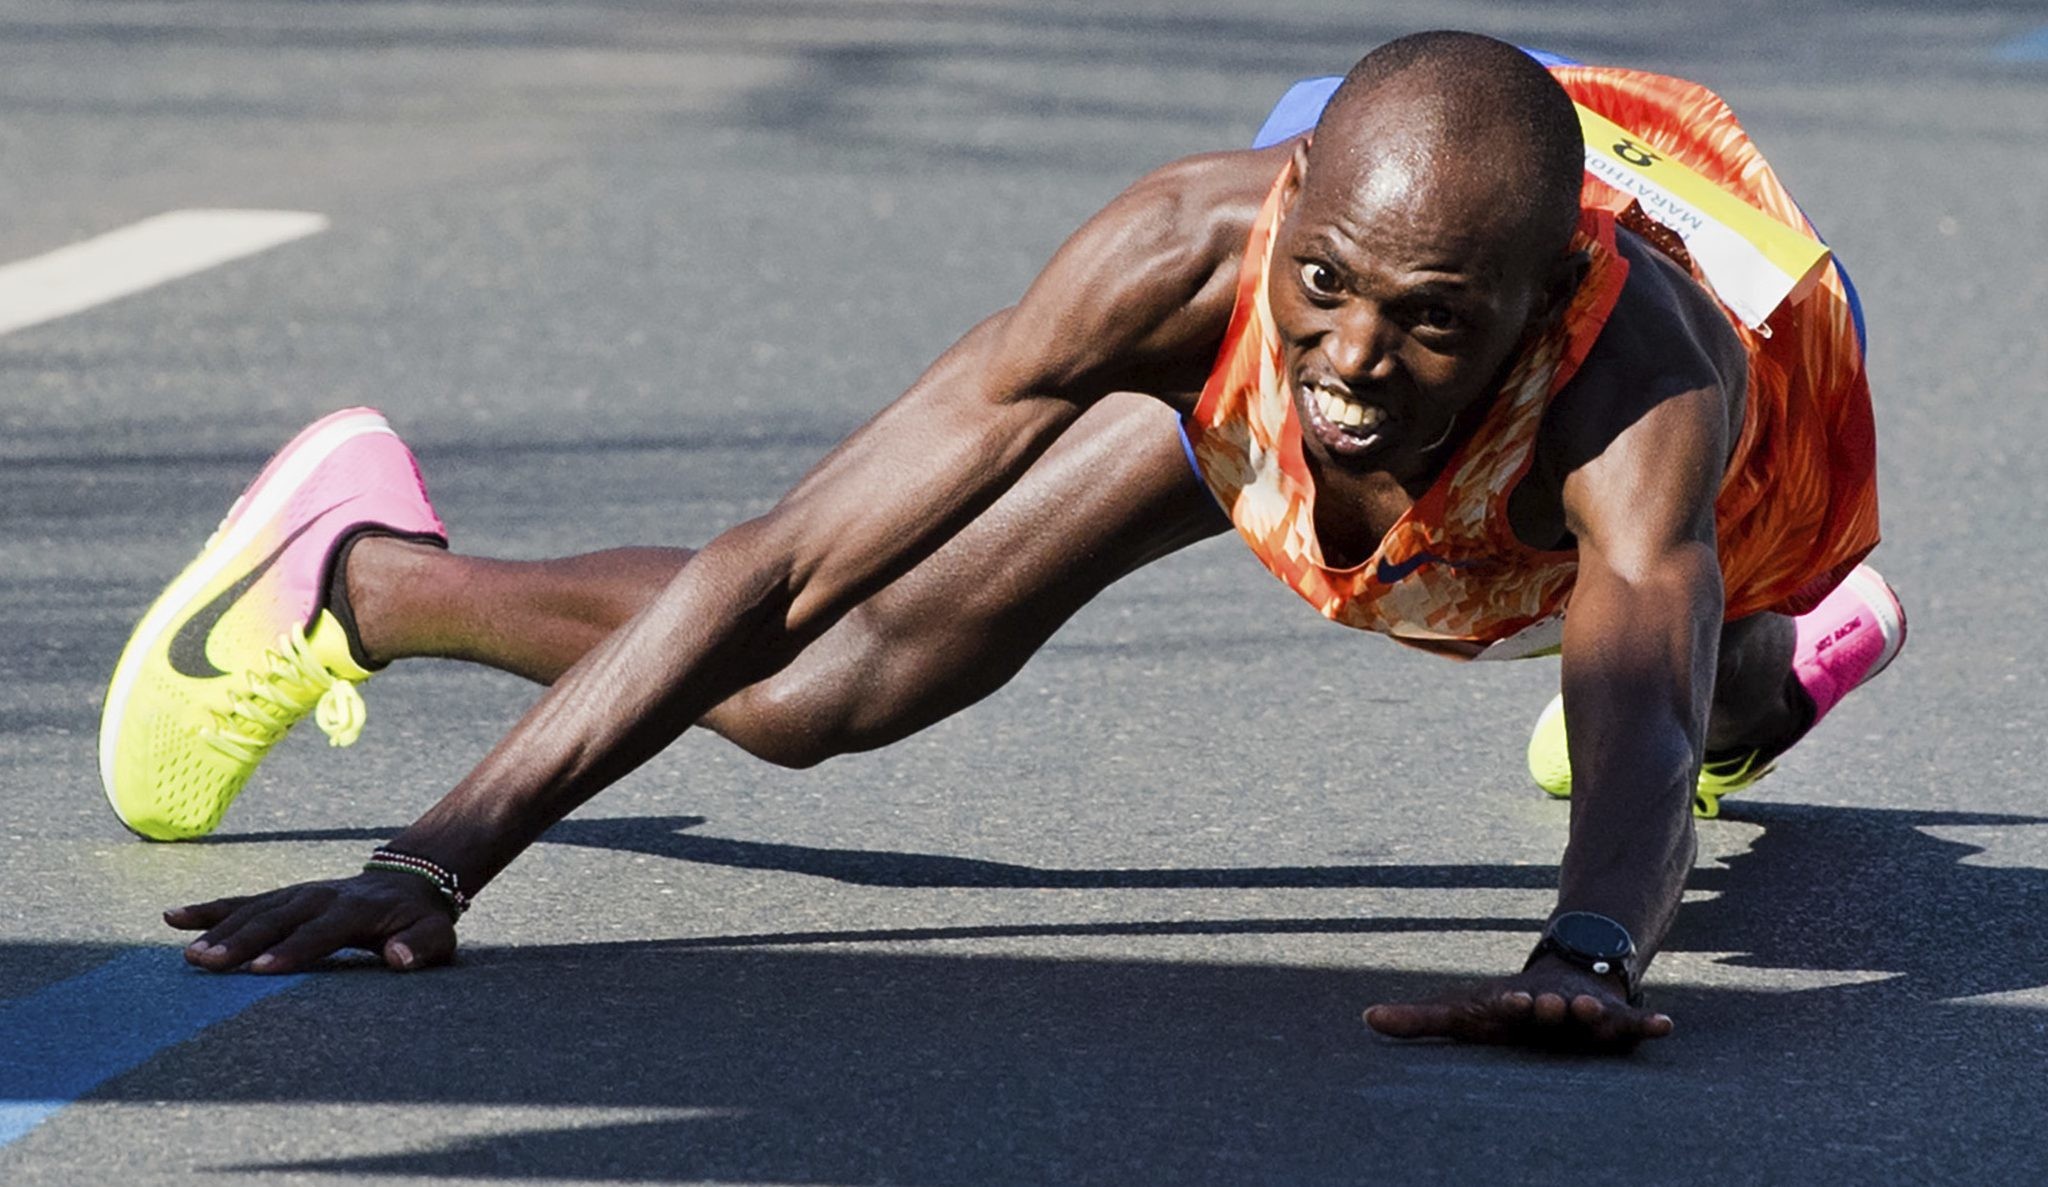 Kenyaâ€™s Michael Kunyuga was nearing the finish line of the Hannover Marathon when the unexpected happened